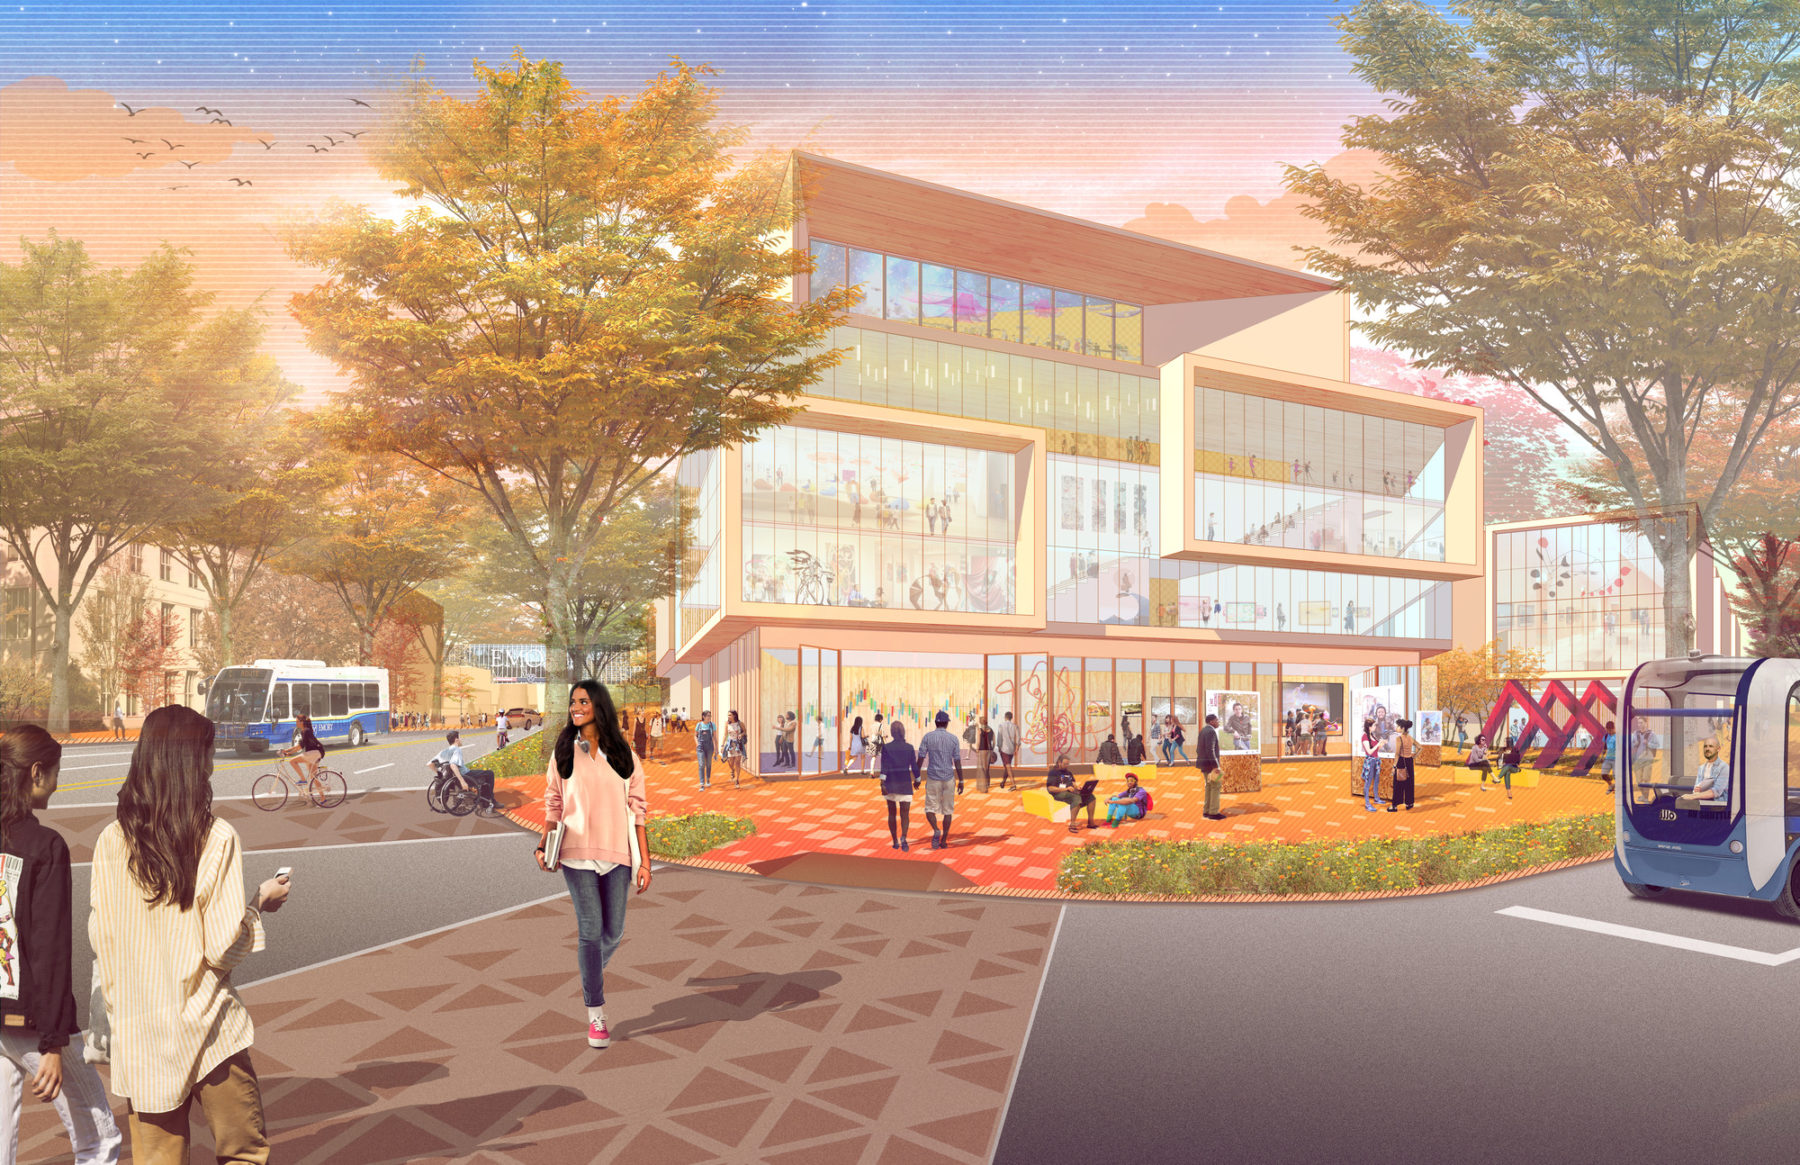 perspective rendering of proposed arts gateway